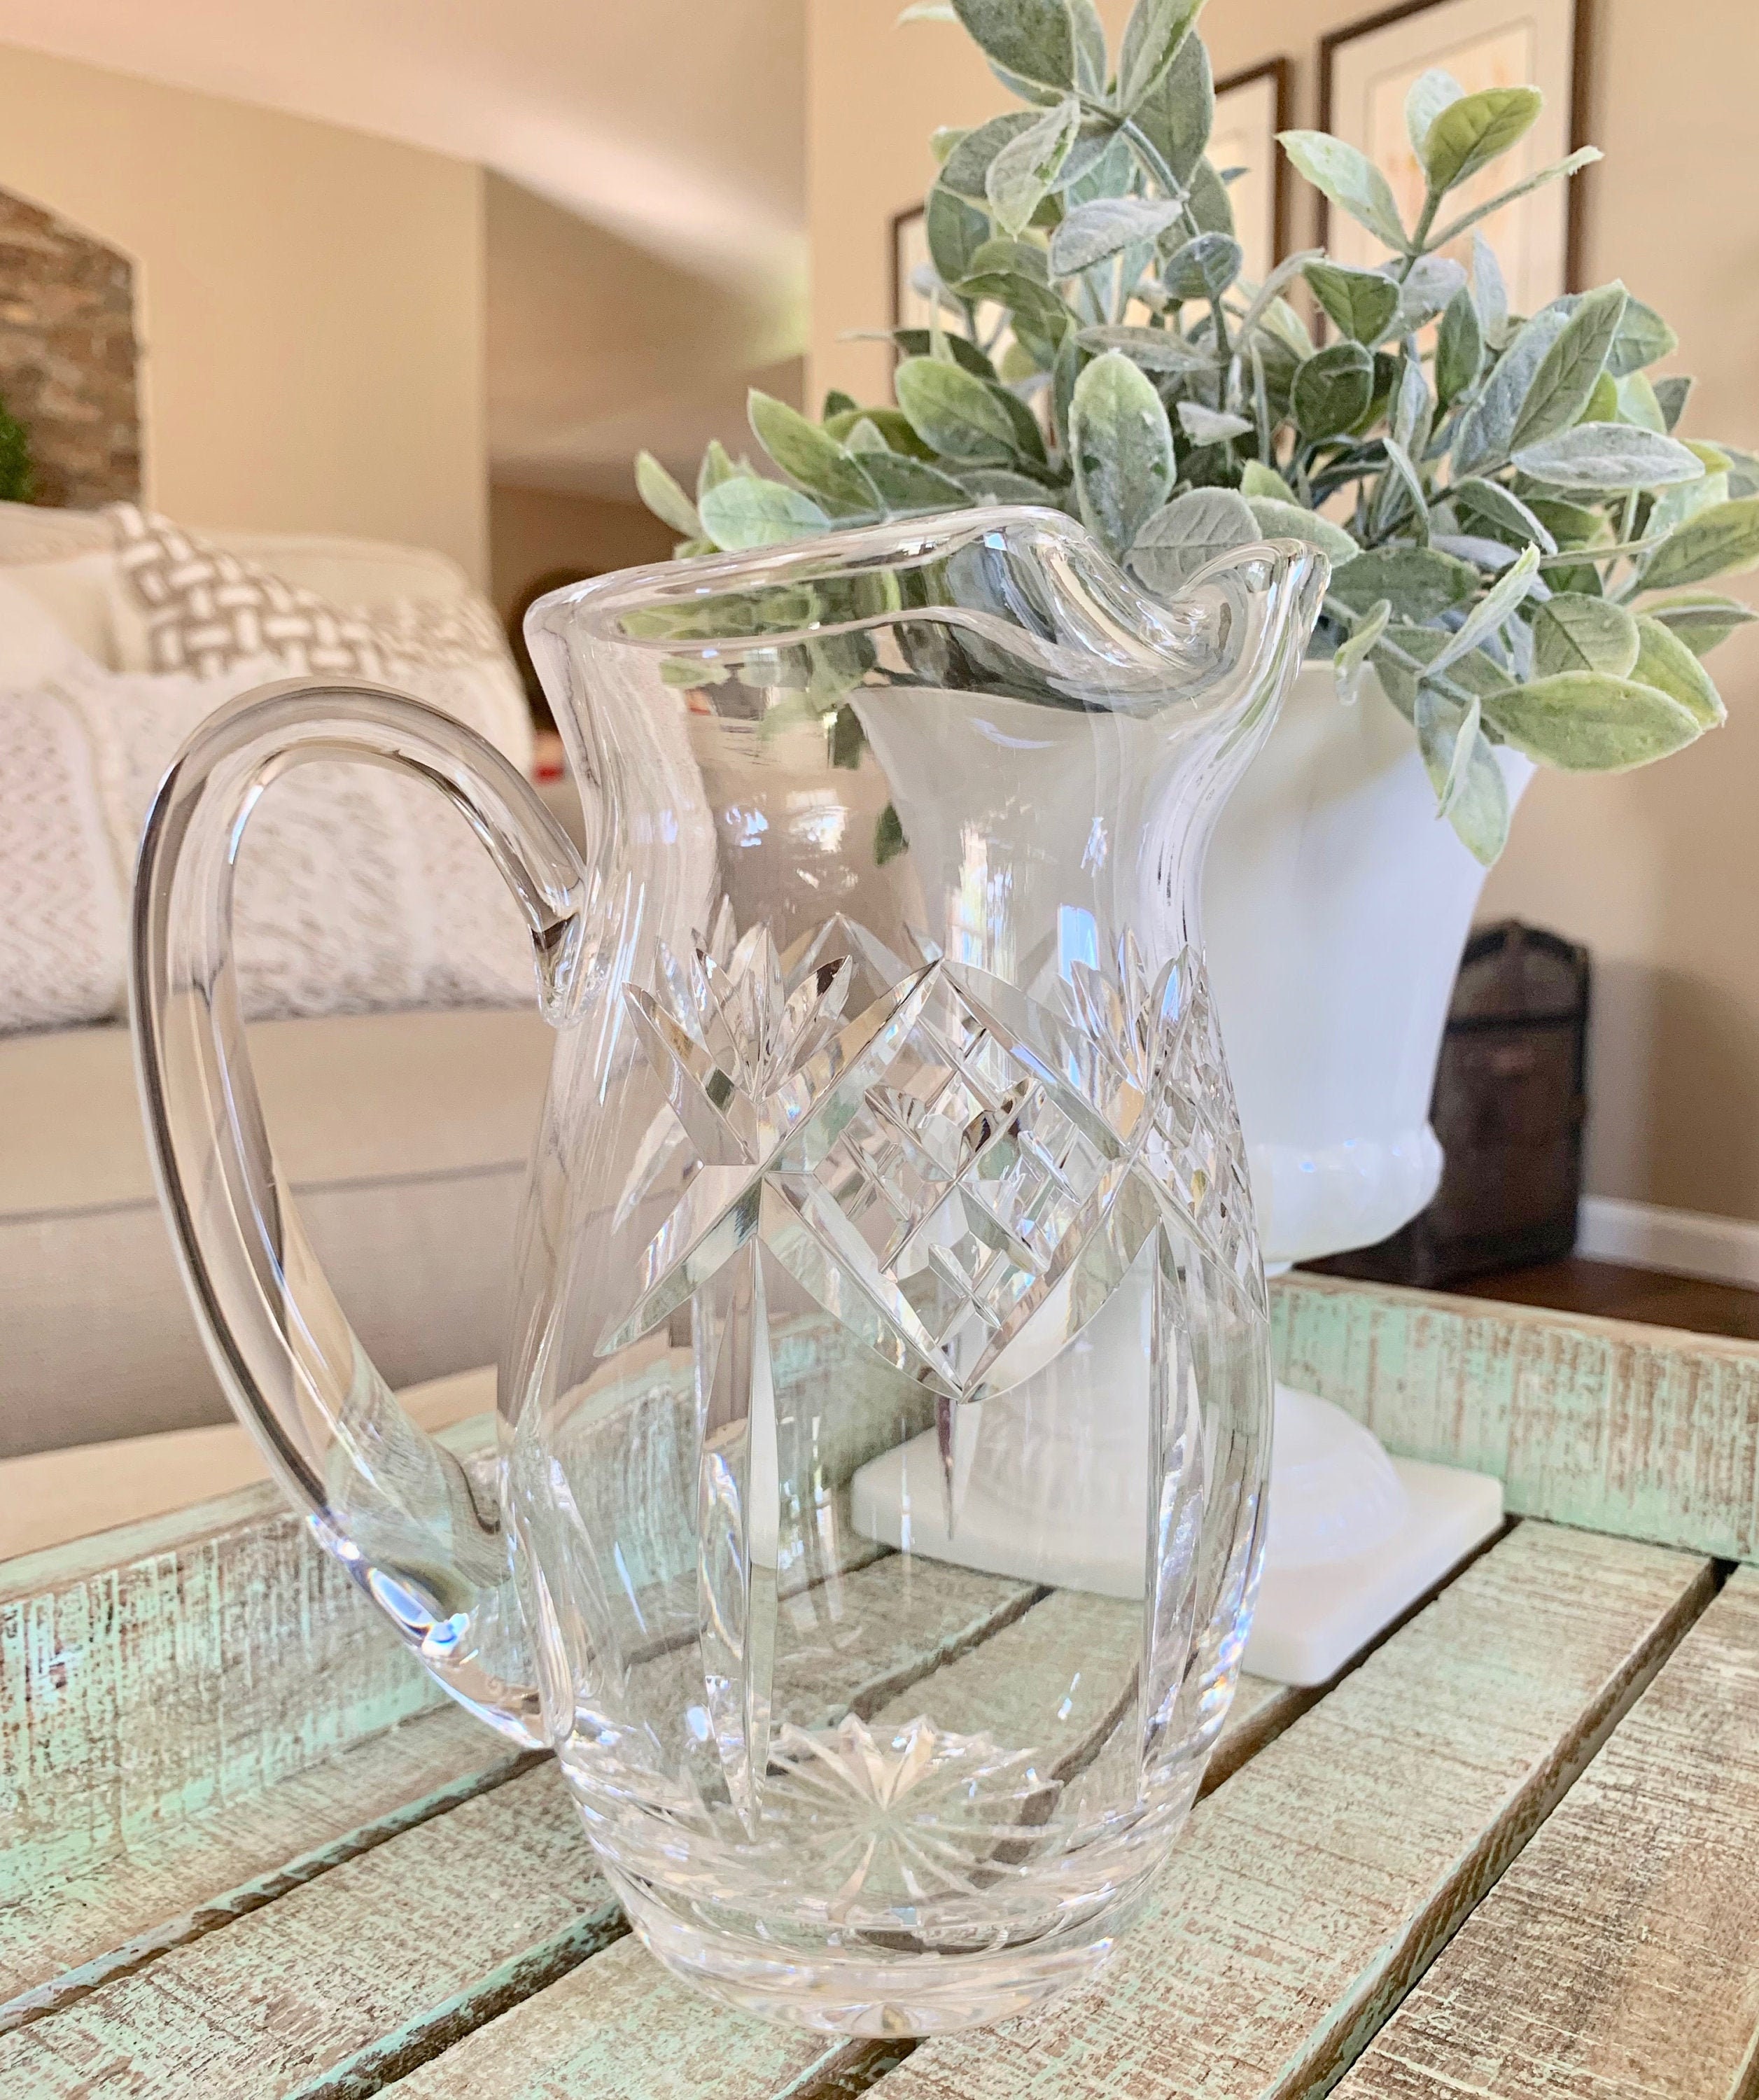 Glass Water Pitcher - Unique Strip On Neck Handle Pattern, – Stone boomer